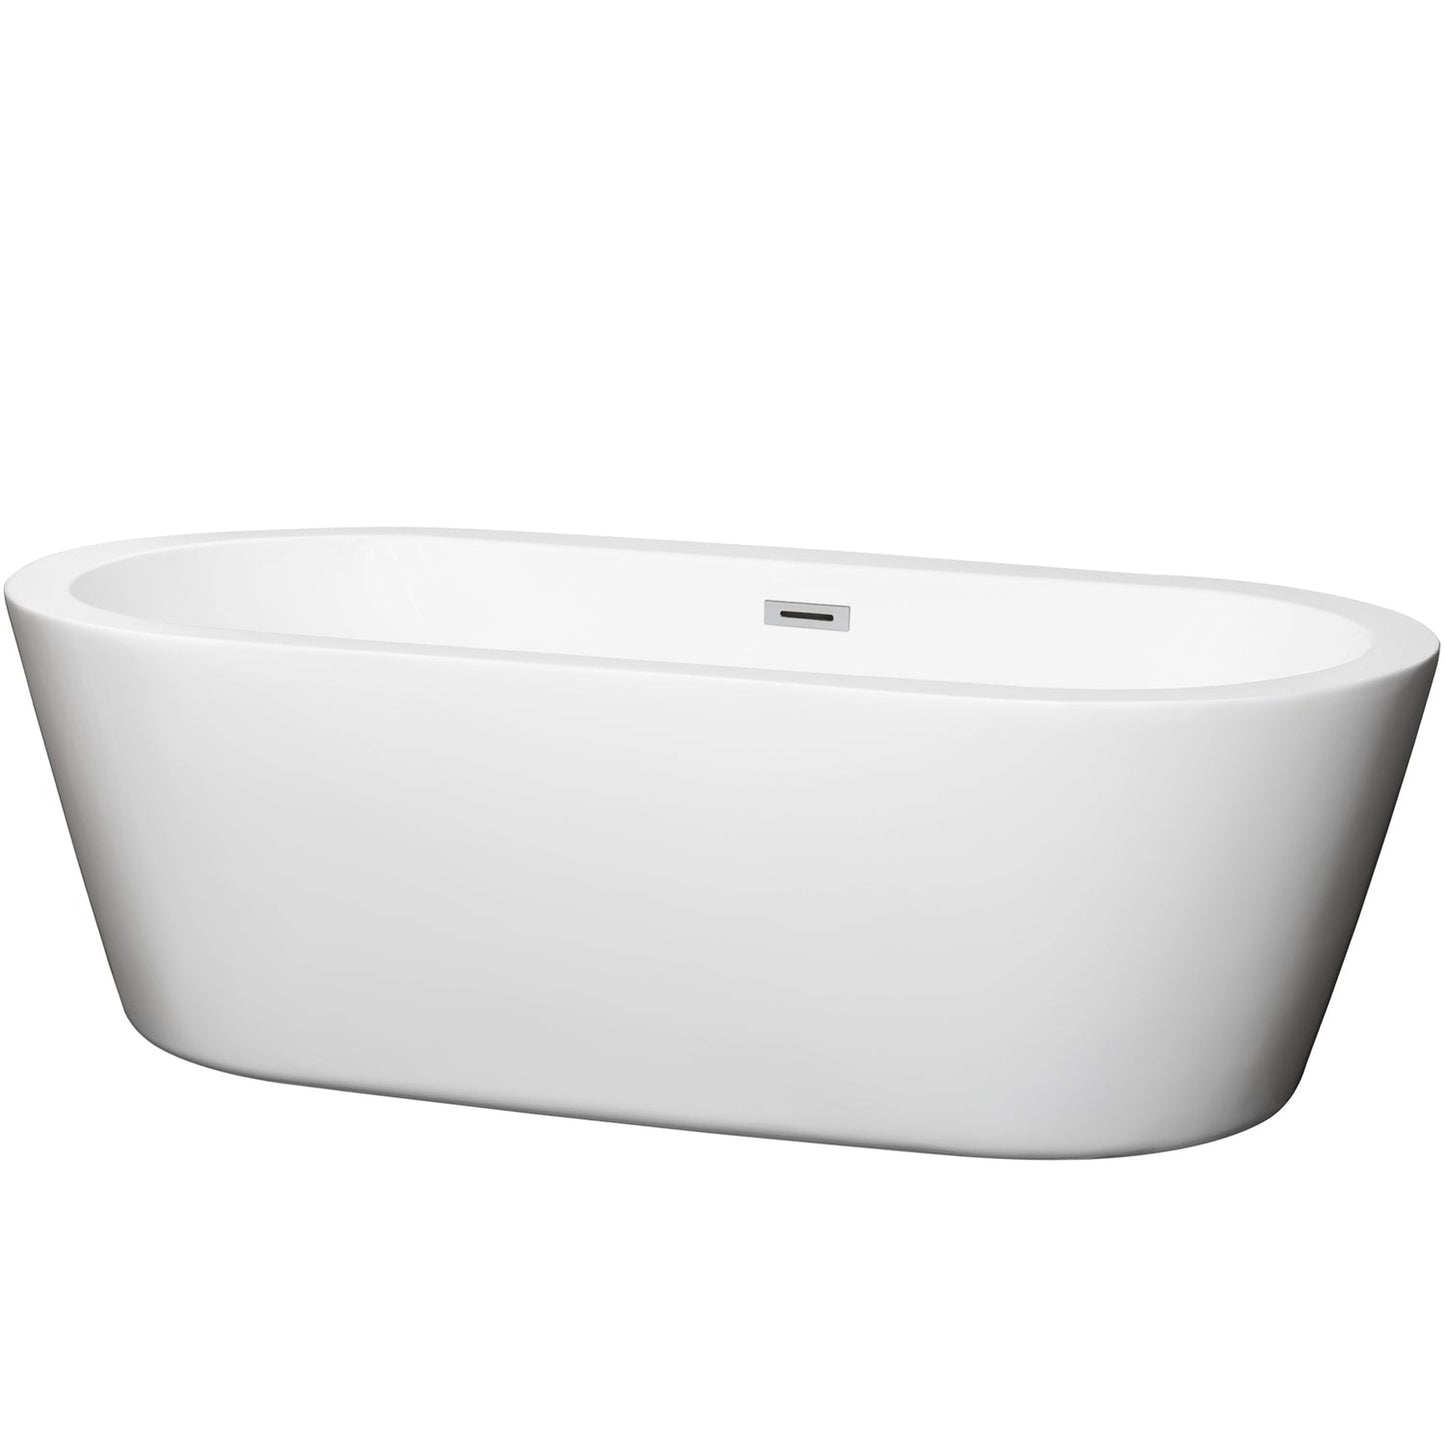 Wyndham Collection Mermaid 71" Freestanding Bathtub in White With Polished Chrome Drain and Overflow Trim